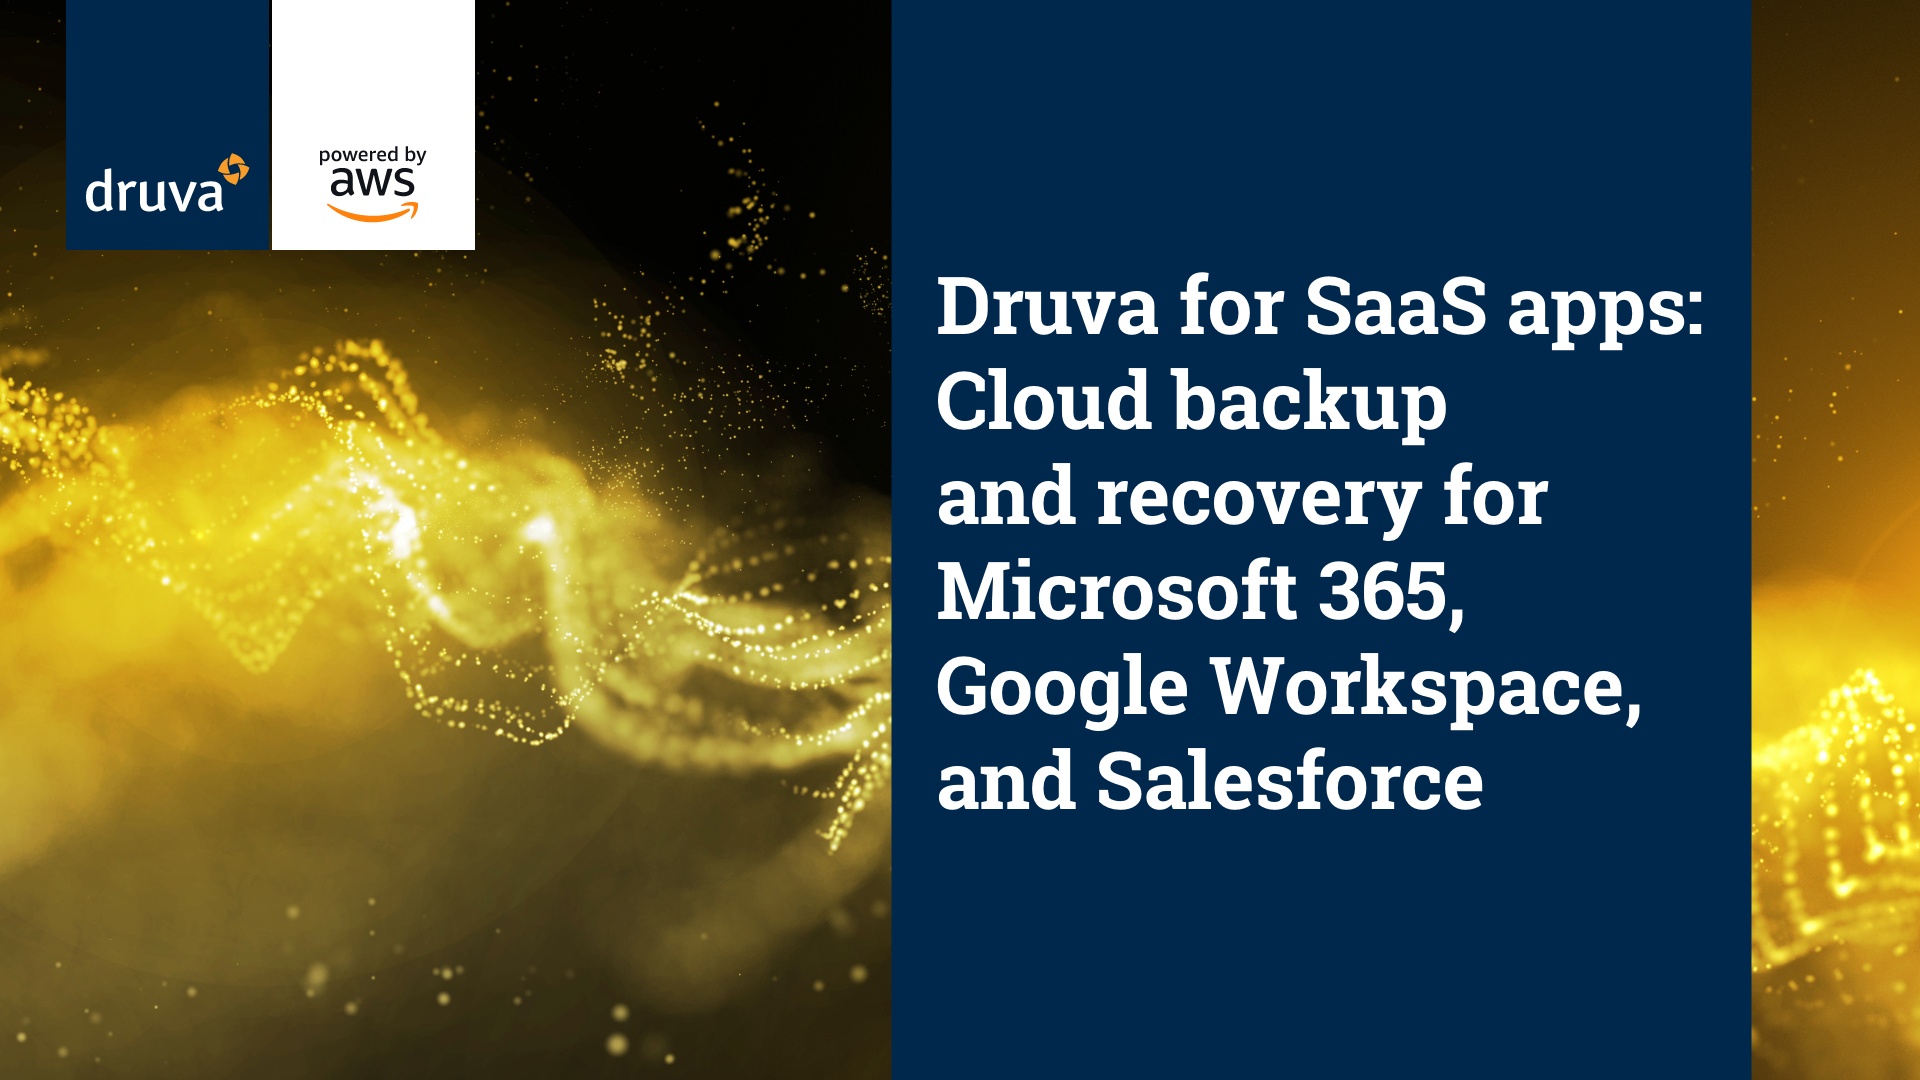 Druva for SaaS apps: Microsoft 365, Google Workspace, and Salesforce